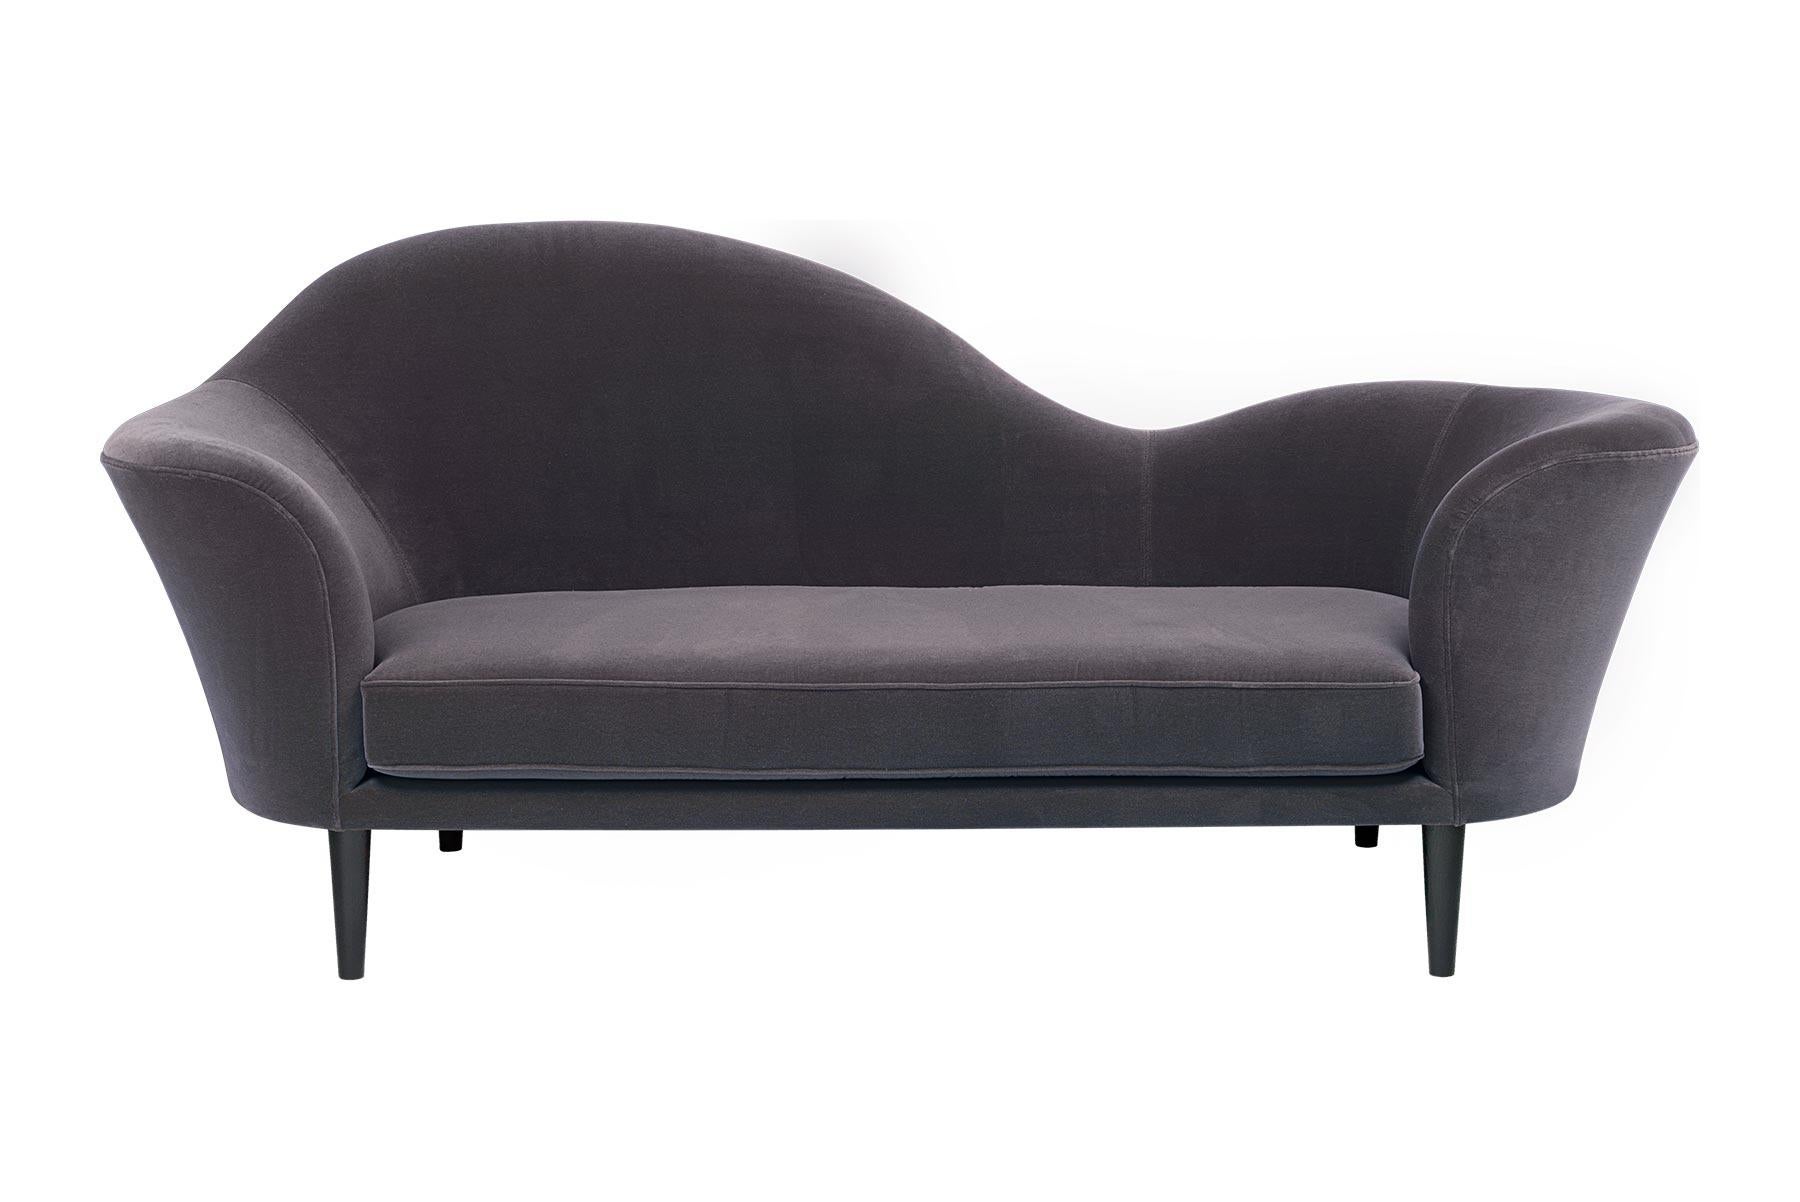 With its musical form and sculptural Silhouette, the grand piano sofa from 1984 takes both its name and inspiration from a grand piano. The unique design language reflects the designer Gubi Olsen’s true interest in classical music as well as soft,